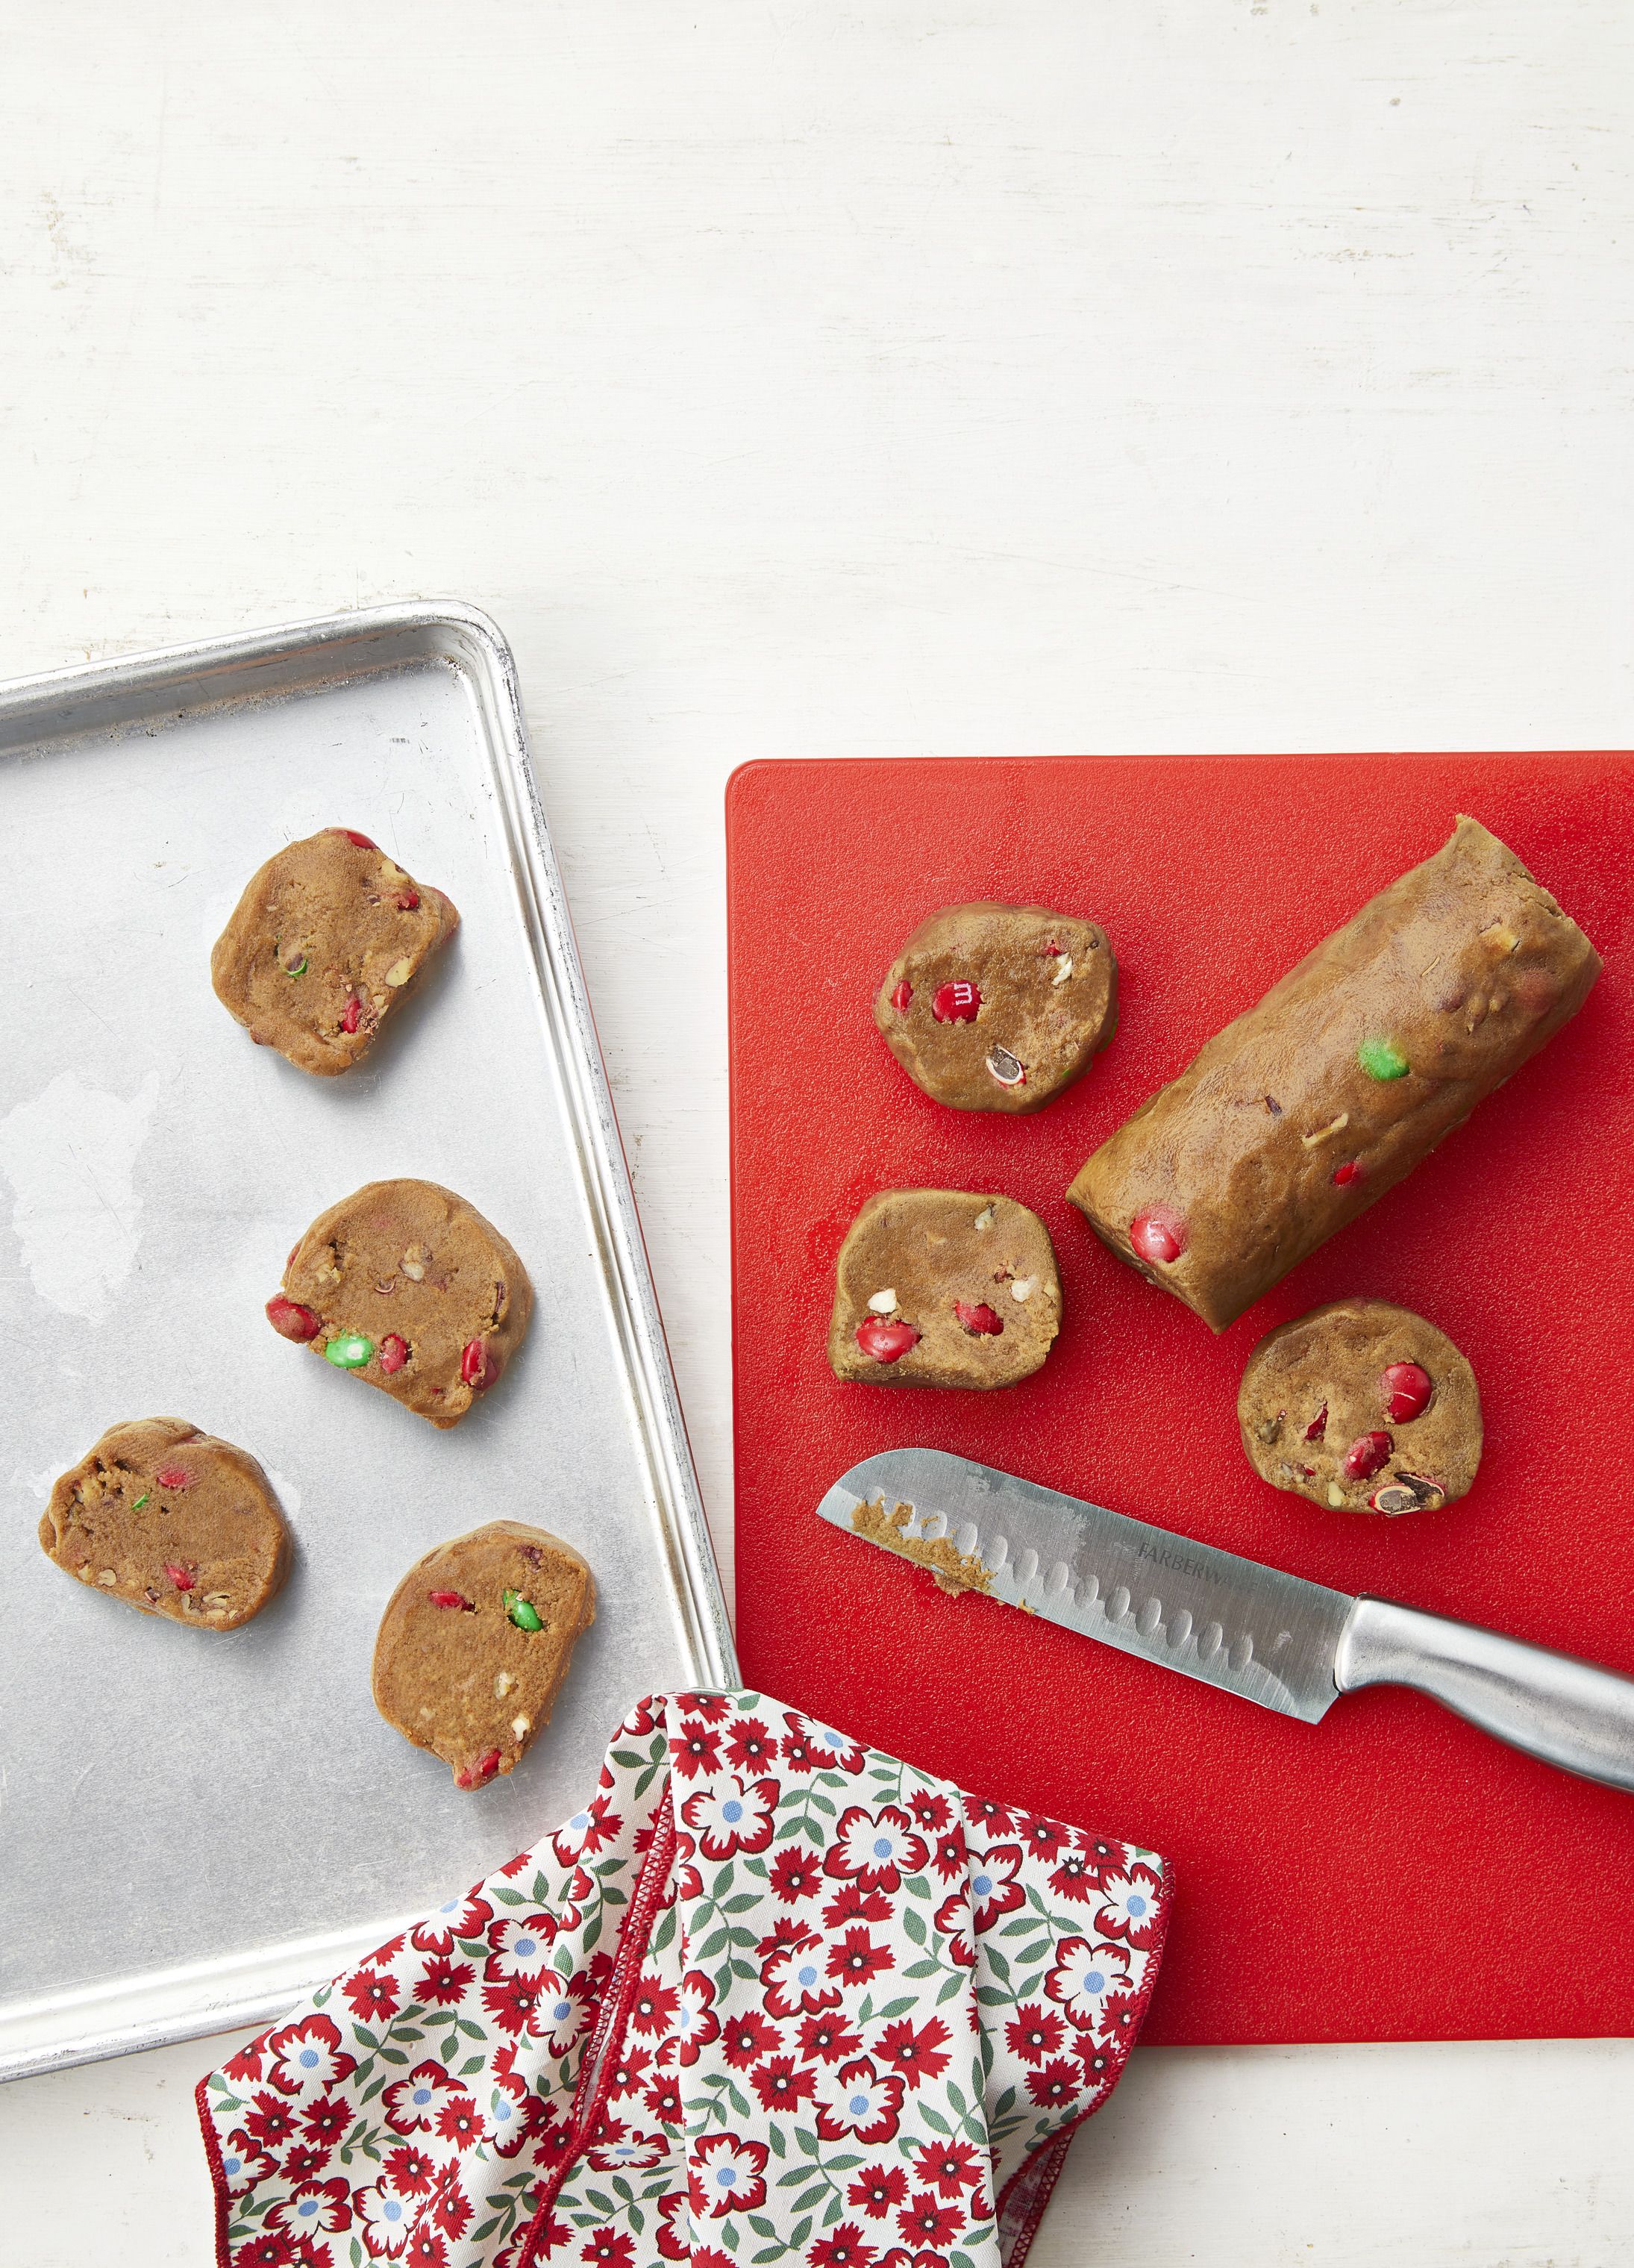 https://hips.hearstapps.com/hmg-prod/images/how-to-freeze-cookies-1605717028.jpg